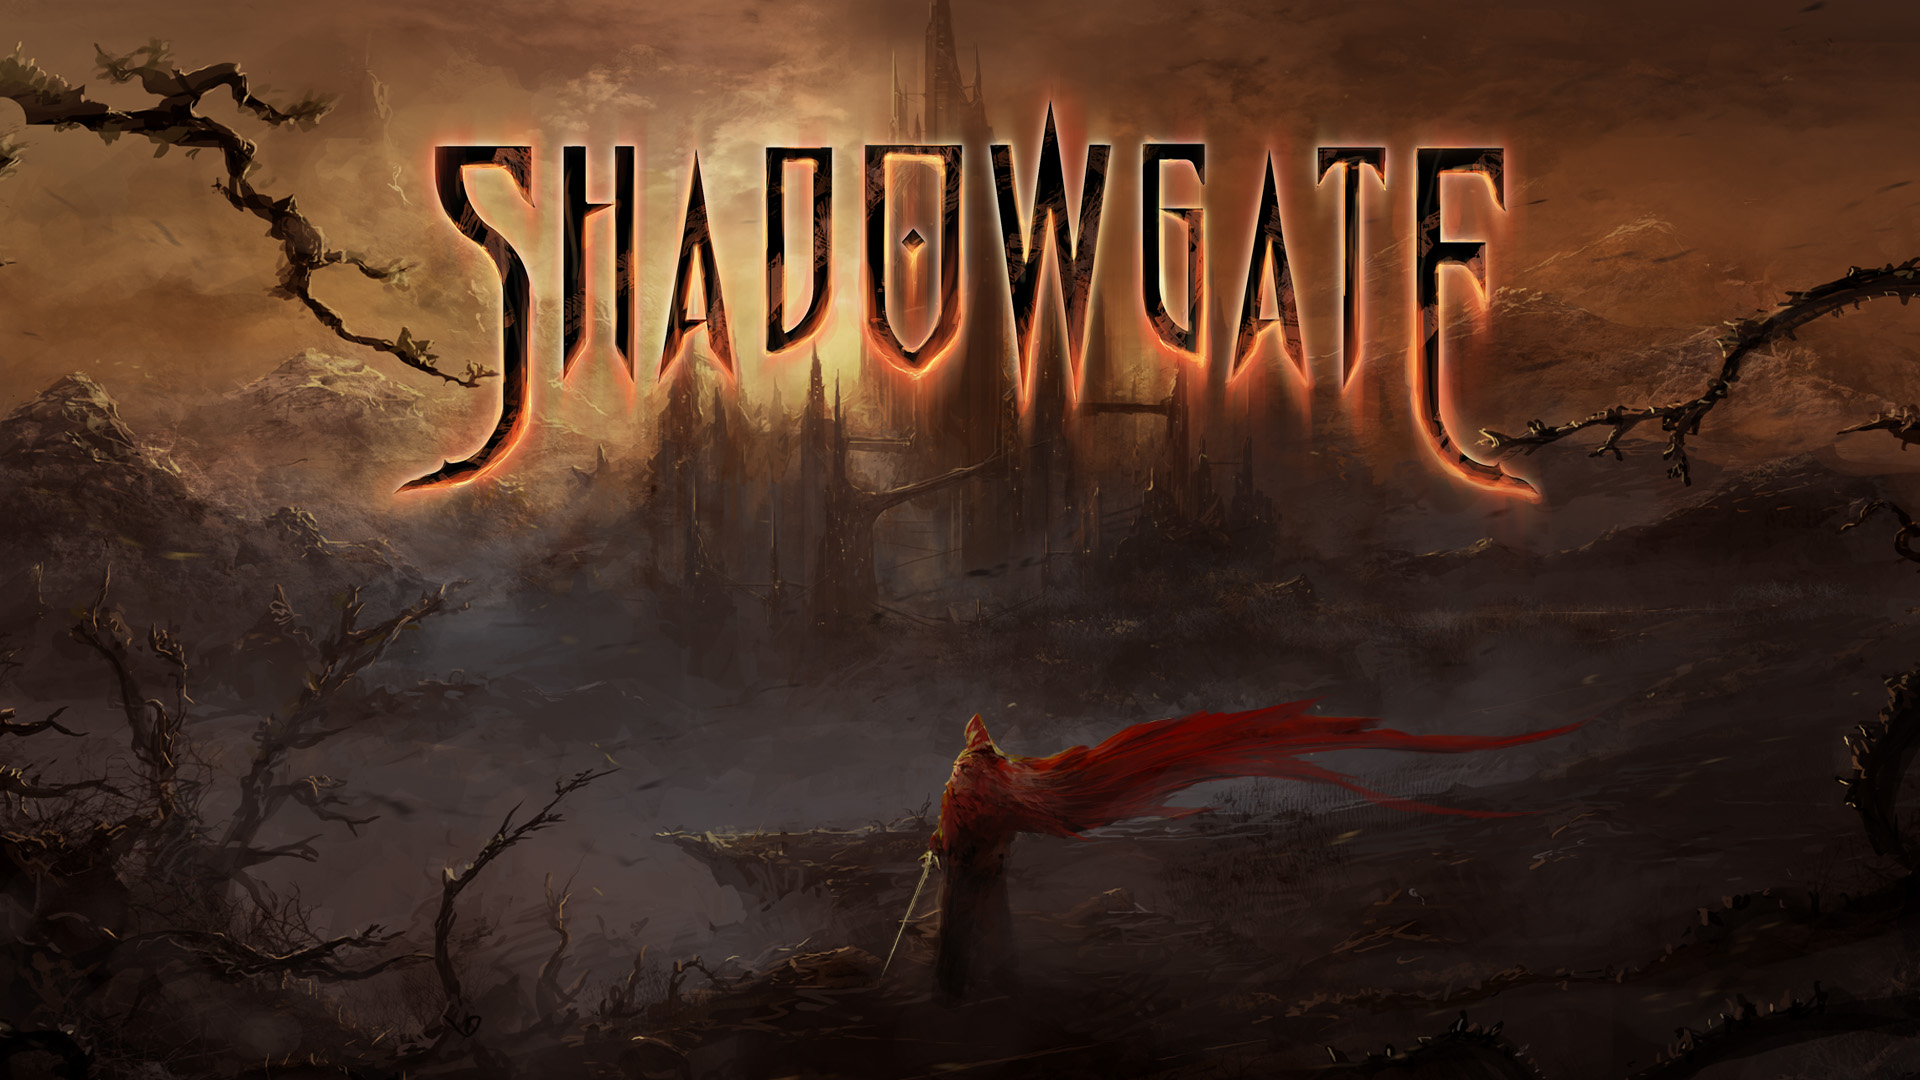 Shadowgate VR: The Mines of Mythrok no Steam